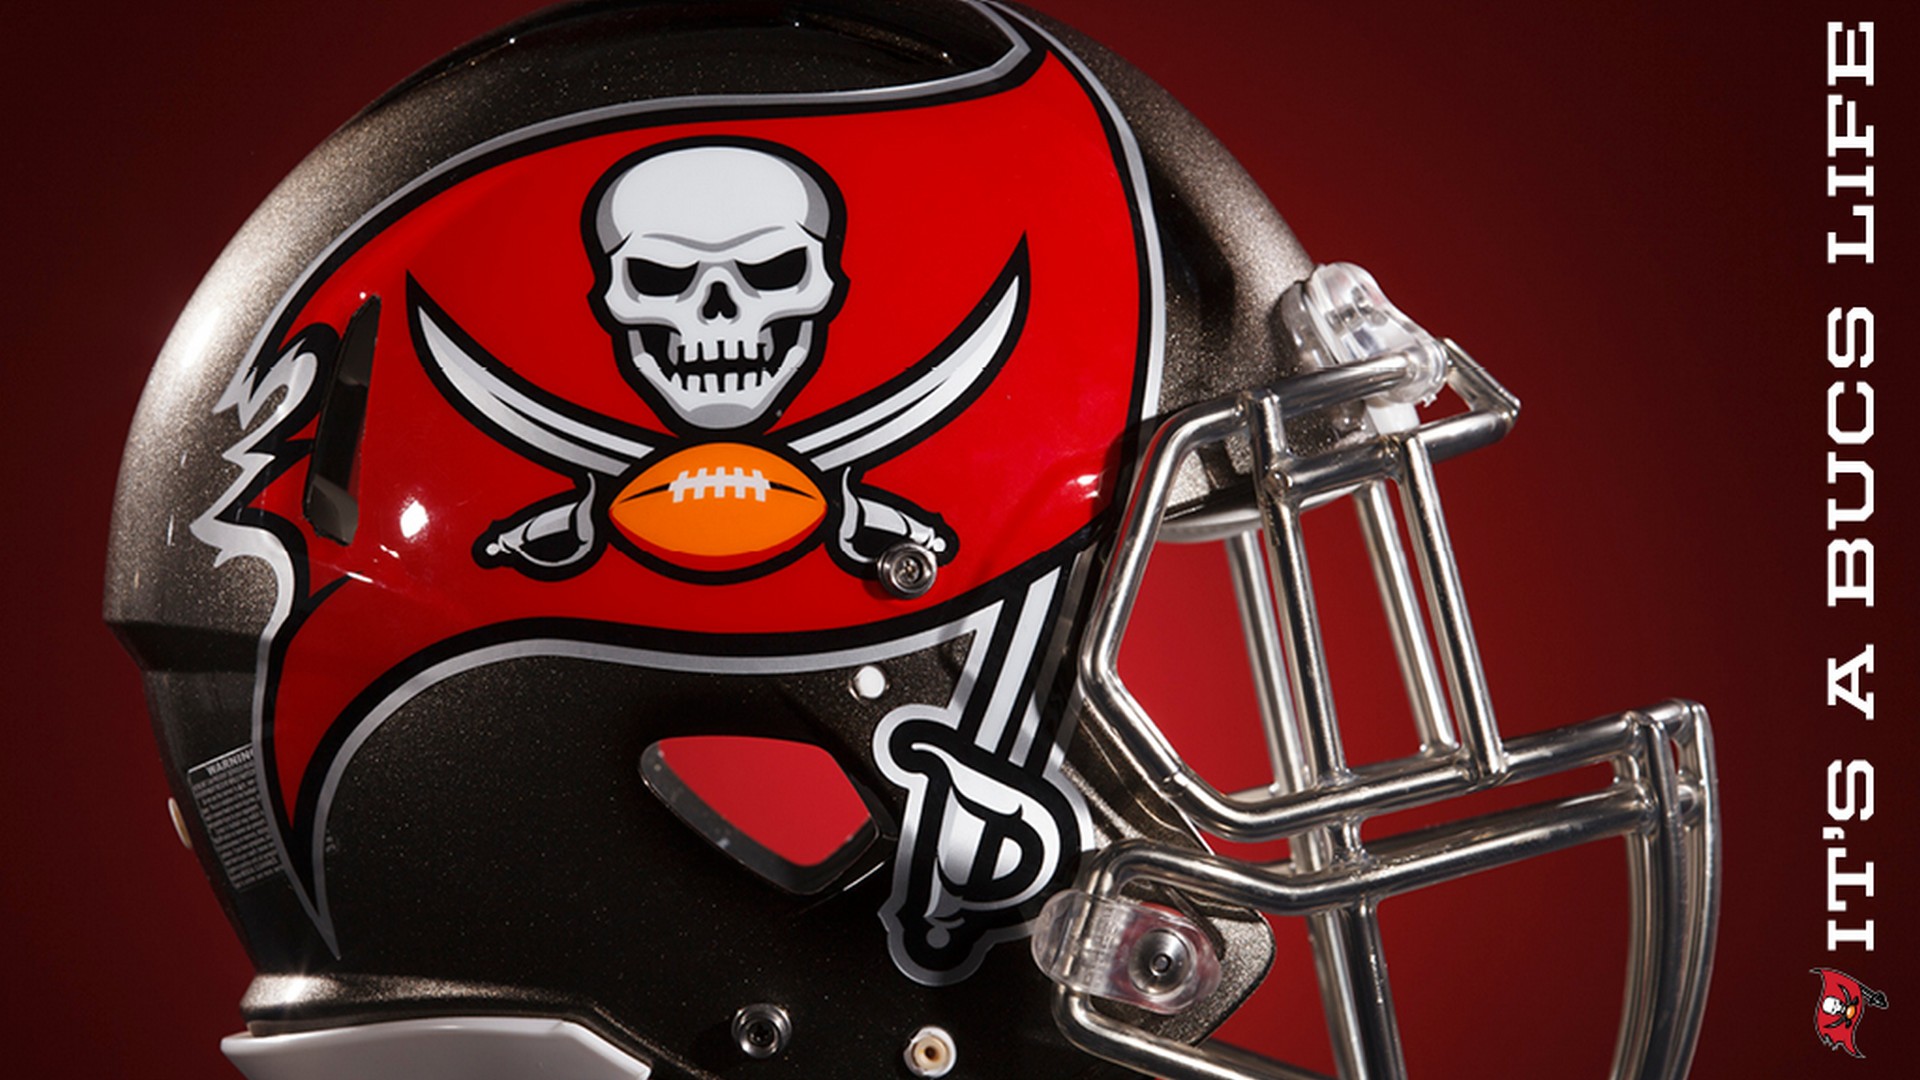 HD Backgrounds Tampa Bay Buccaneers Logo with high-resolution 1920x1080 pixel. You can use this wallpaper for your Mac or Windows Desktop Background, iPhone, Android or Tablet and another Smartphone device